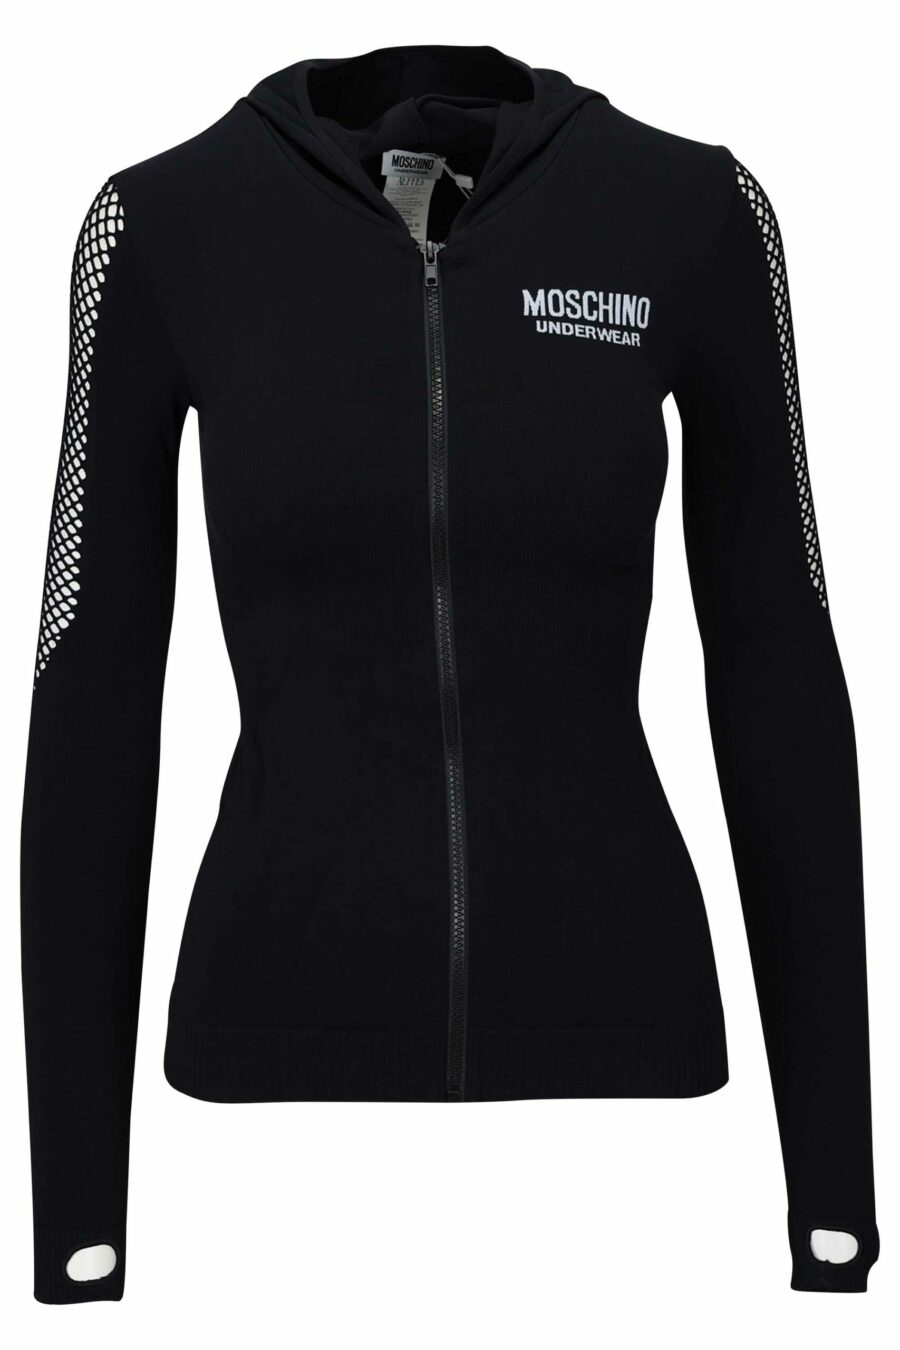 Black sweatshirt with white logo and side mesh - 889316611786 scaled